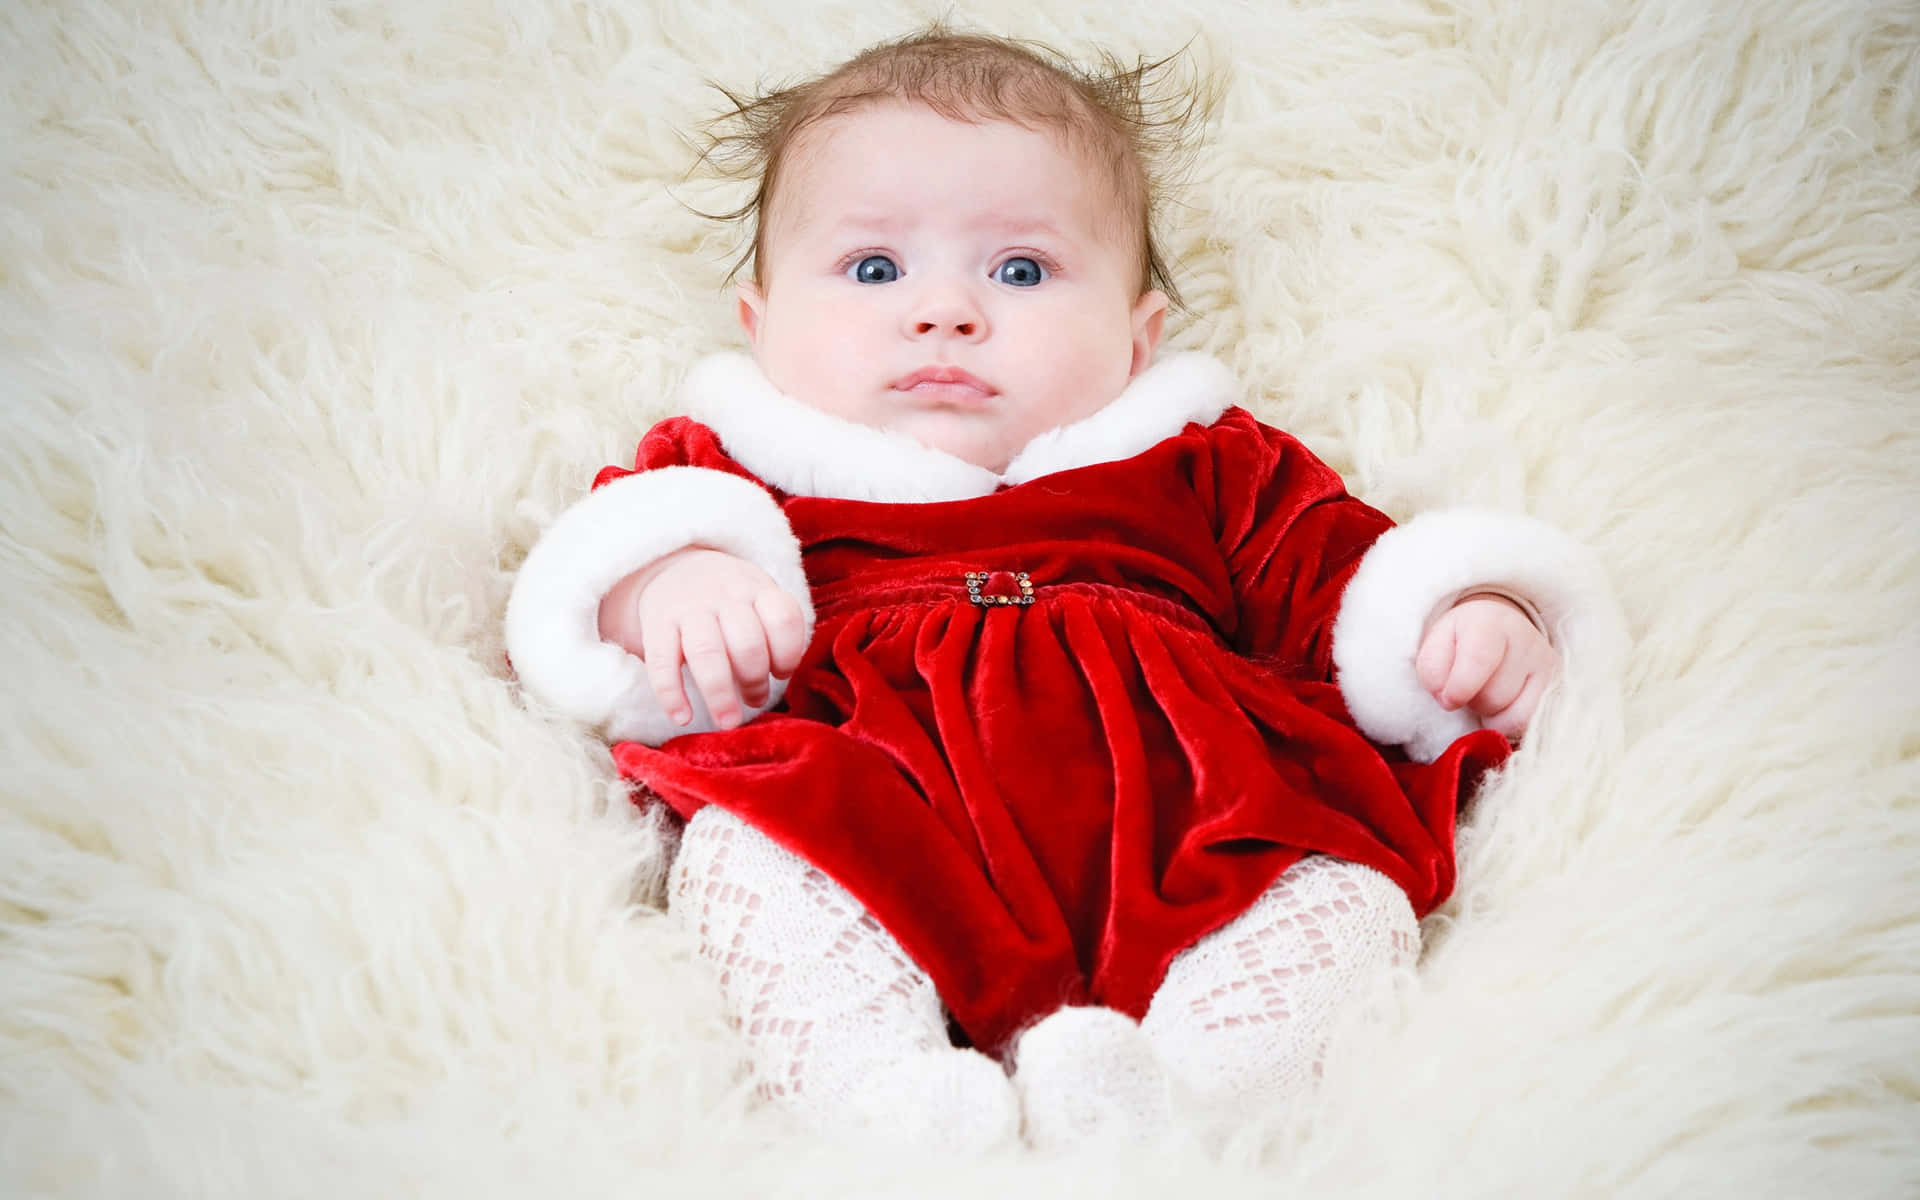 A Baby In A Red Santa Outfit Laying On A White Fur Rug